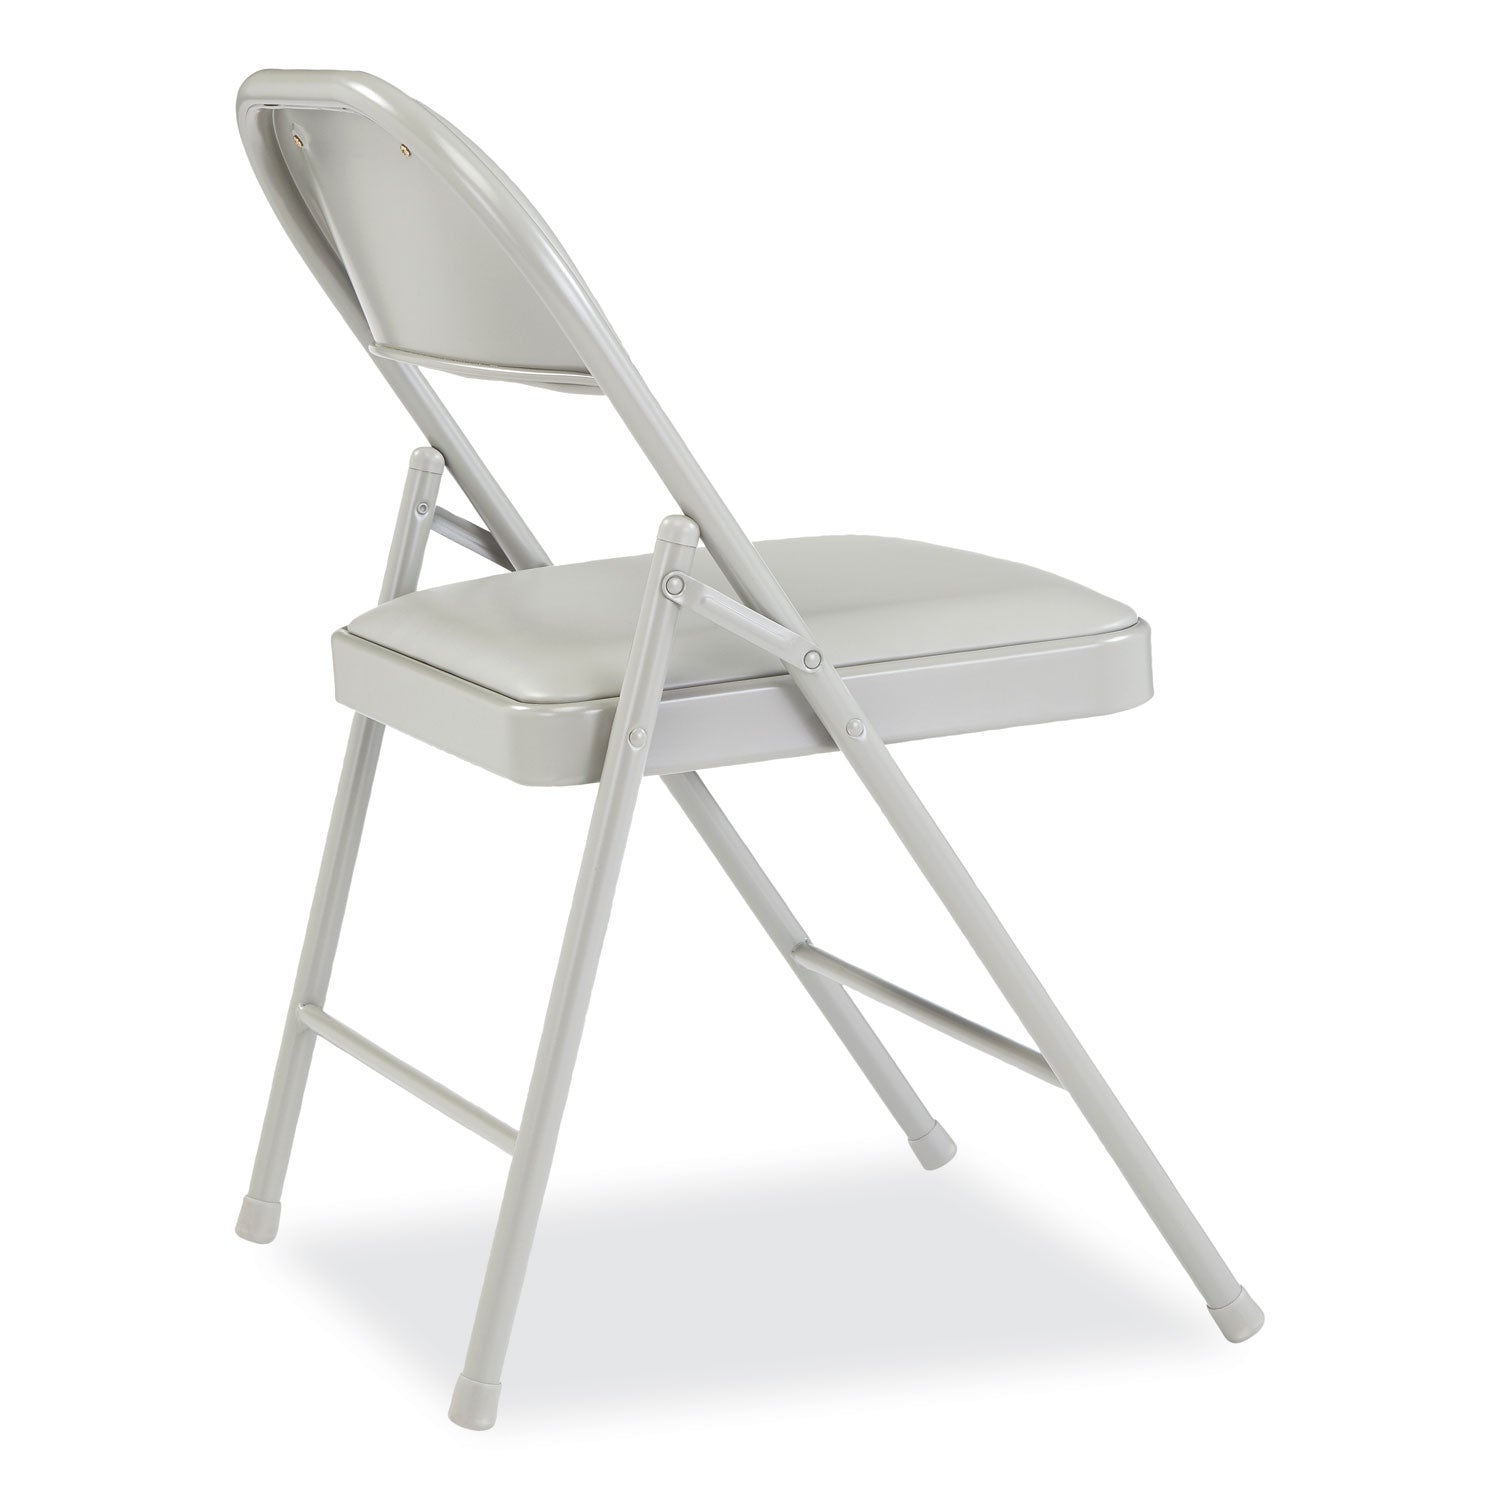 950-series-vinyl-padded-steel-folding-chair-supports-up-to-250-lb-1775-seat-height-gray-4-carton-ships-in-1-3-bus-days_nps952 - 4